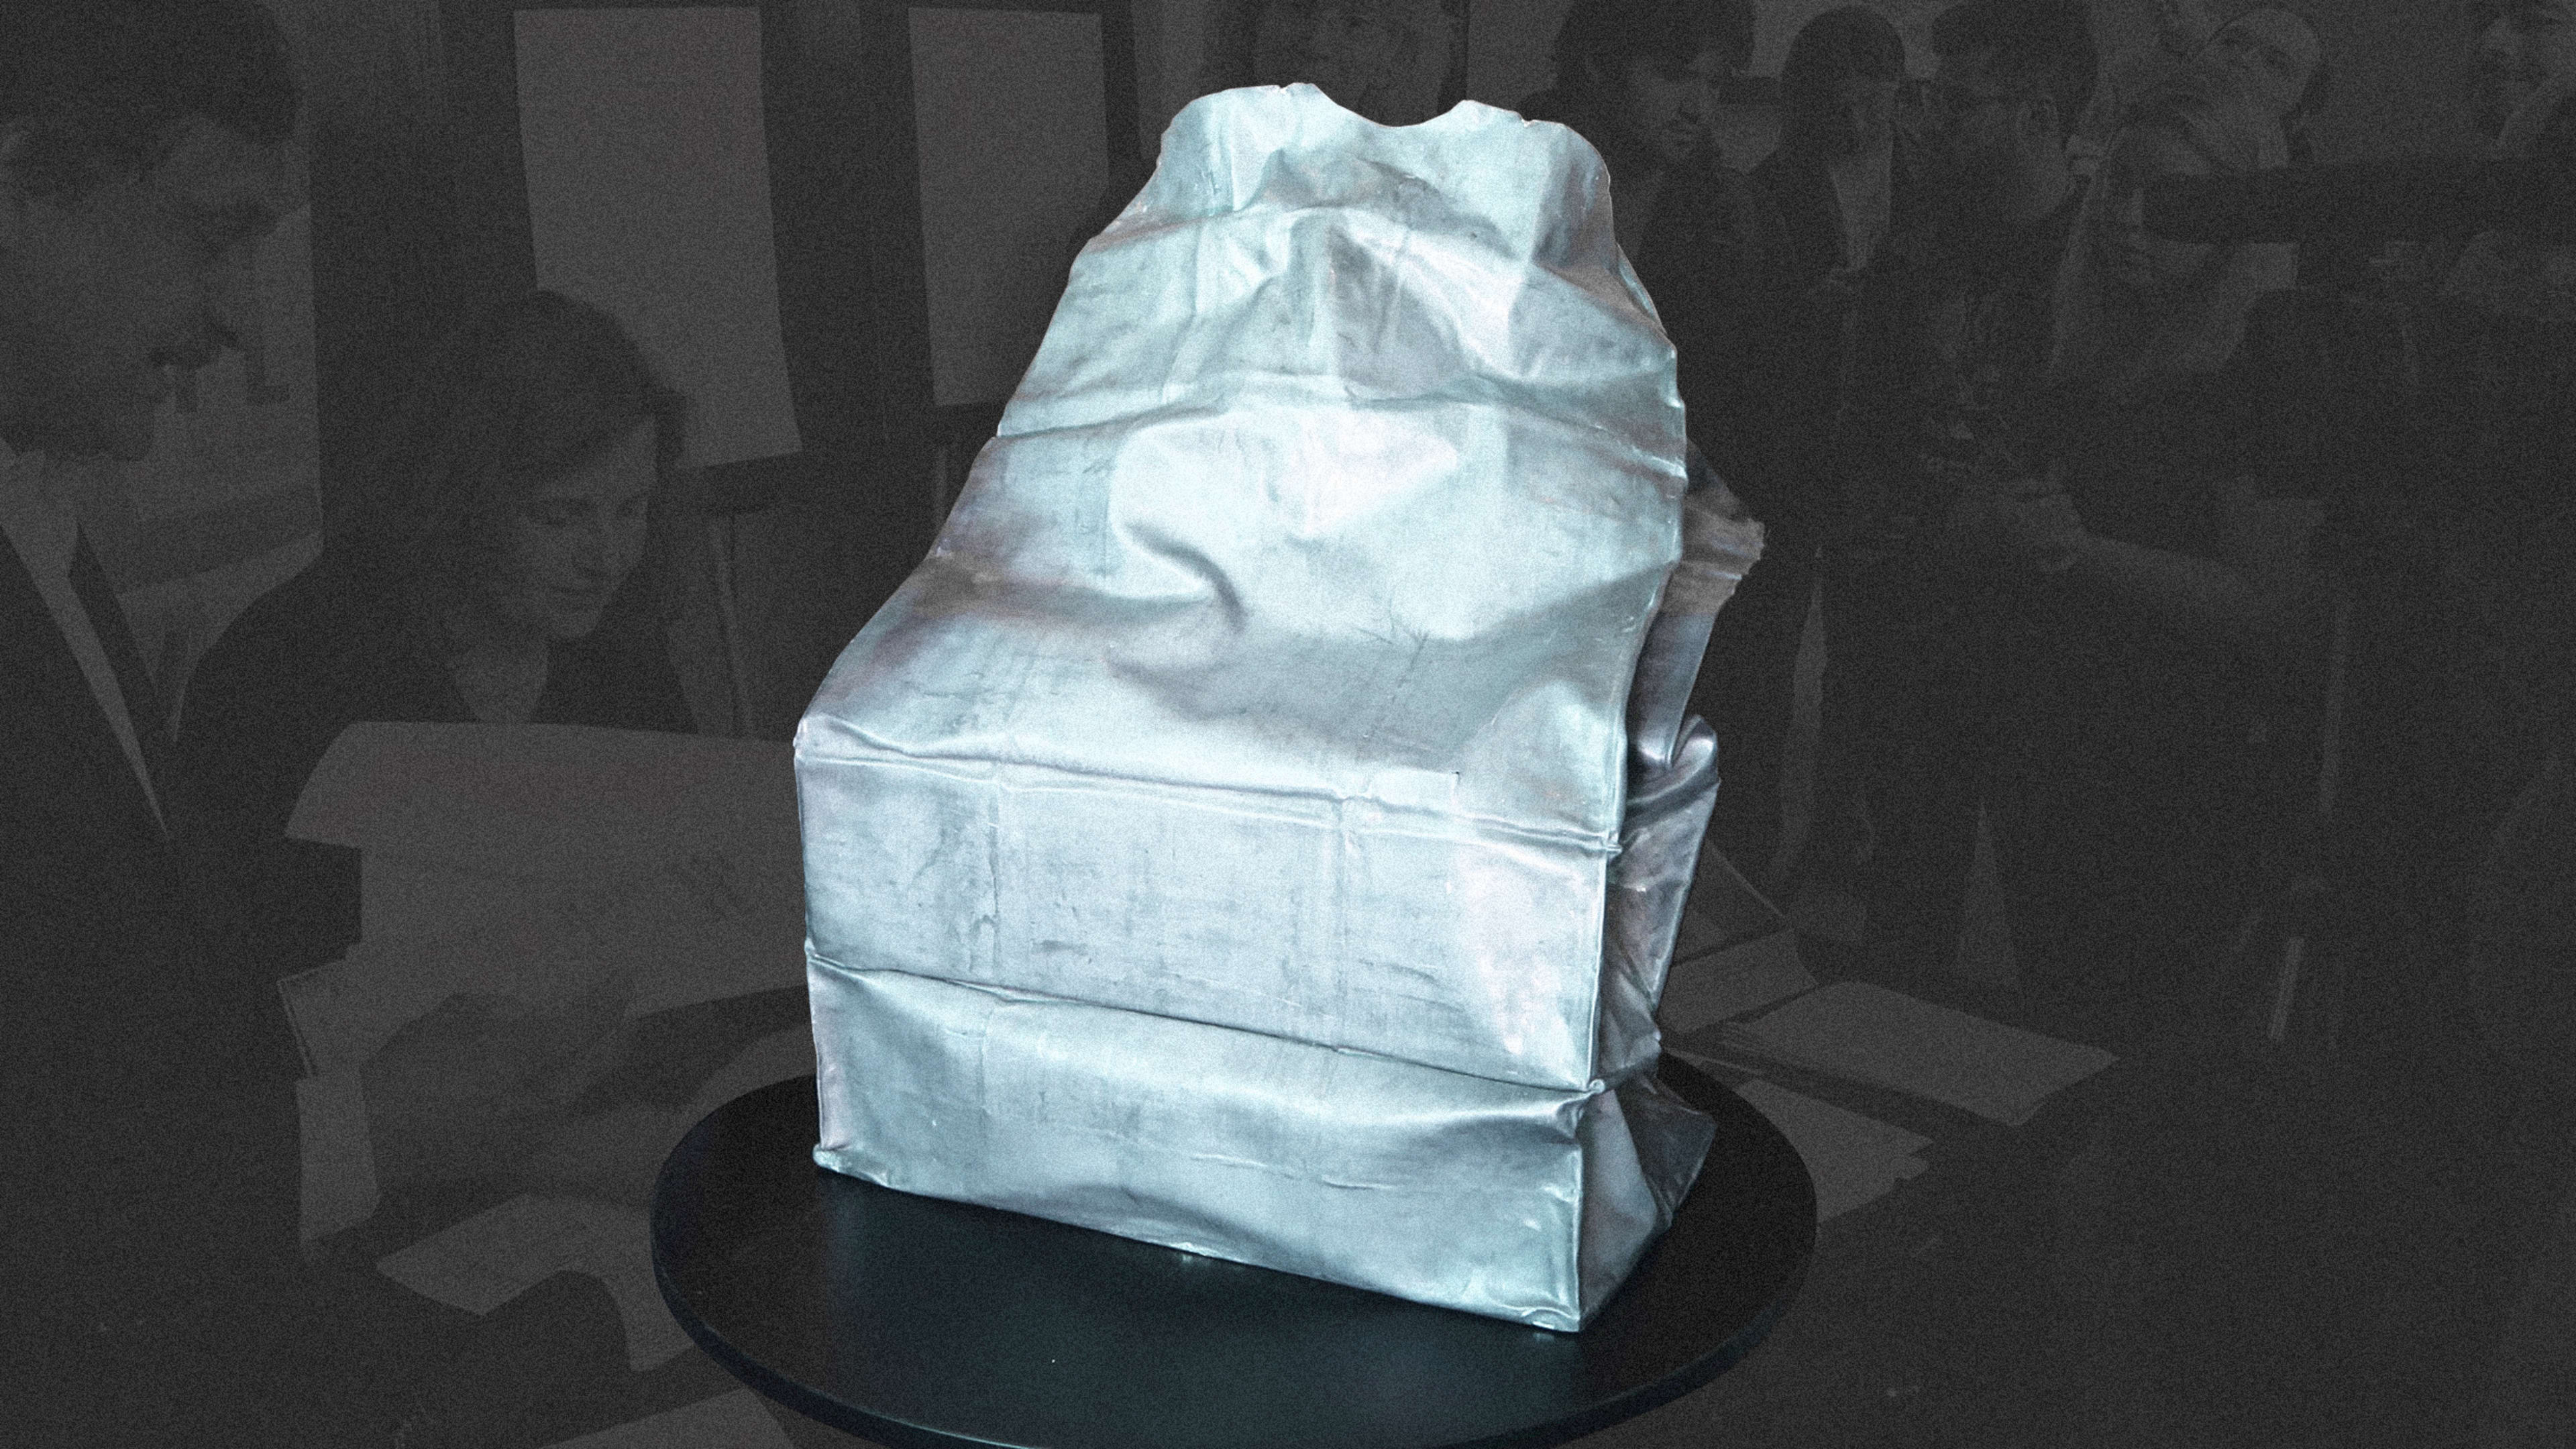 MIT just cracked open an historic time capsule–here’s what was inside